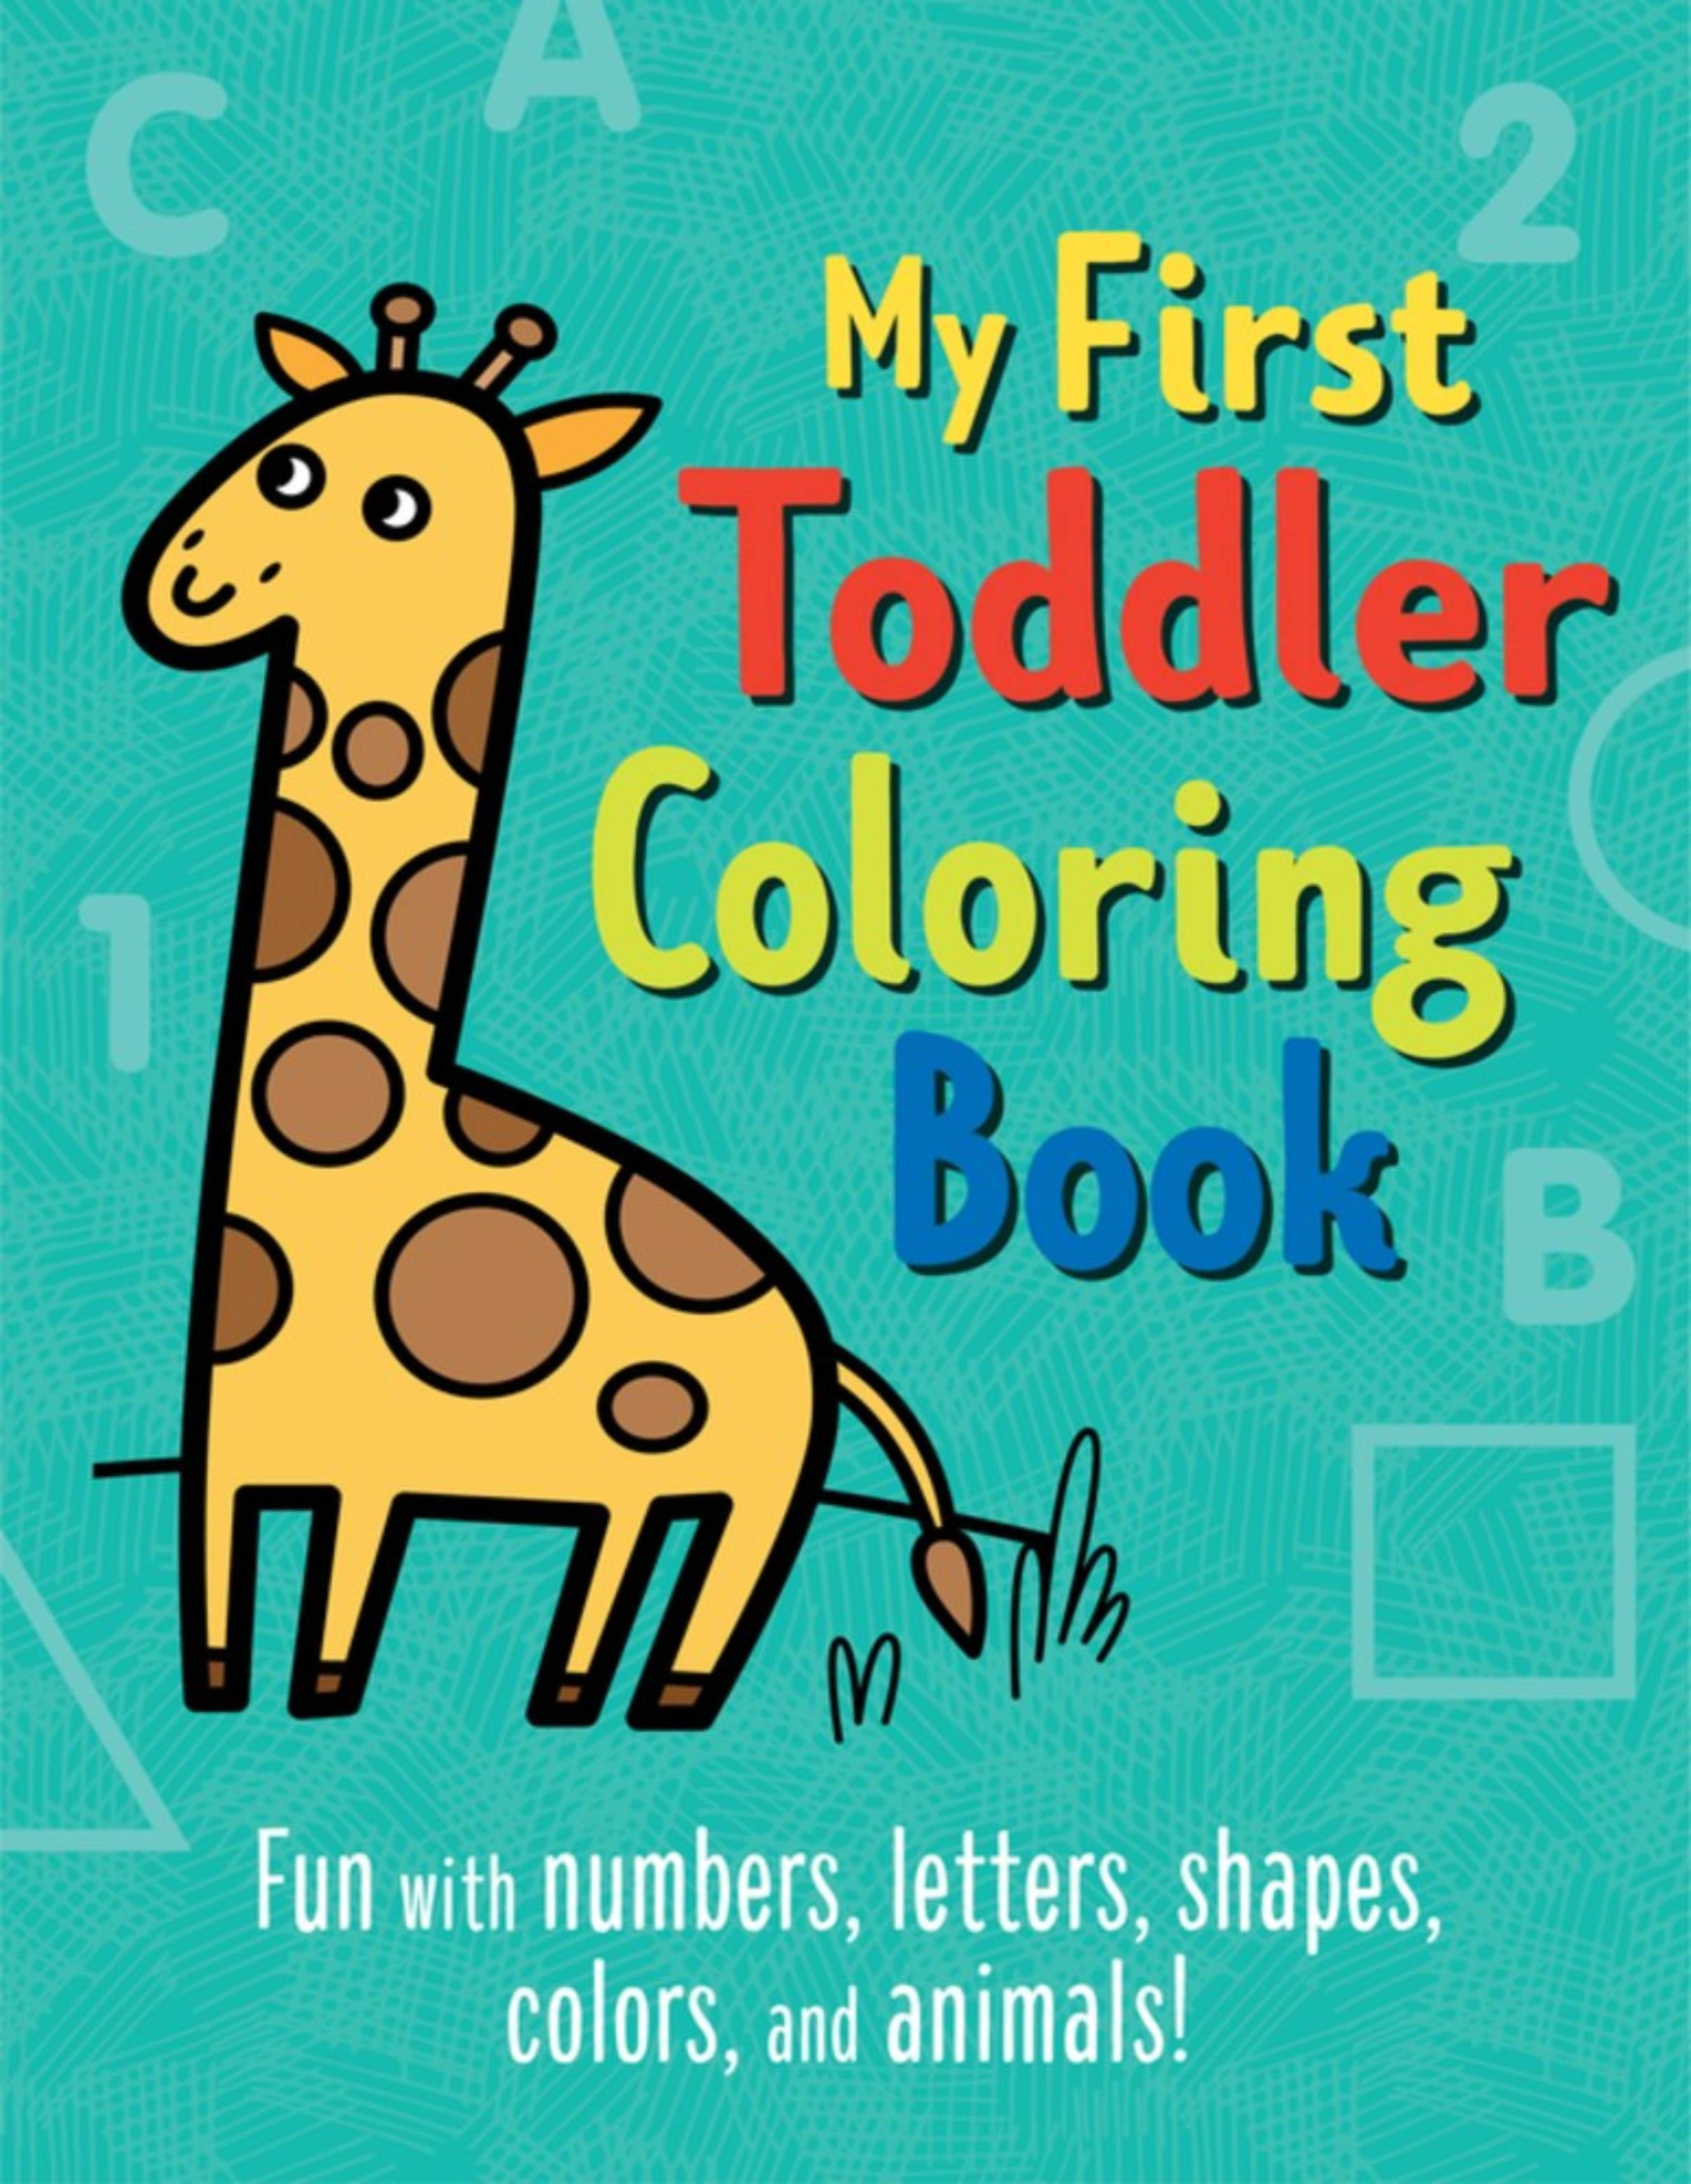 Coloring Books for Kids Ser.: My First Fun for Toddler Coloring Book : Easy Coloring  Books for Toddlers: Kids Ages 2-4, 4-8, Boys, Girls, Fun Early Learning by  Ellie and Friends (2017